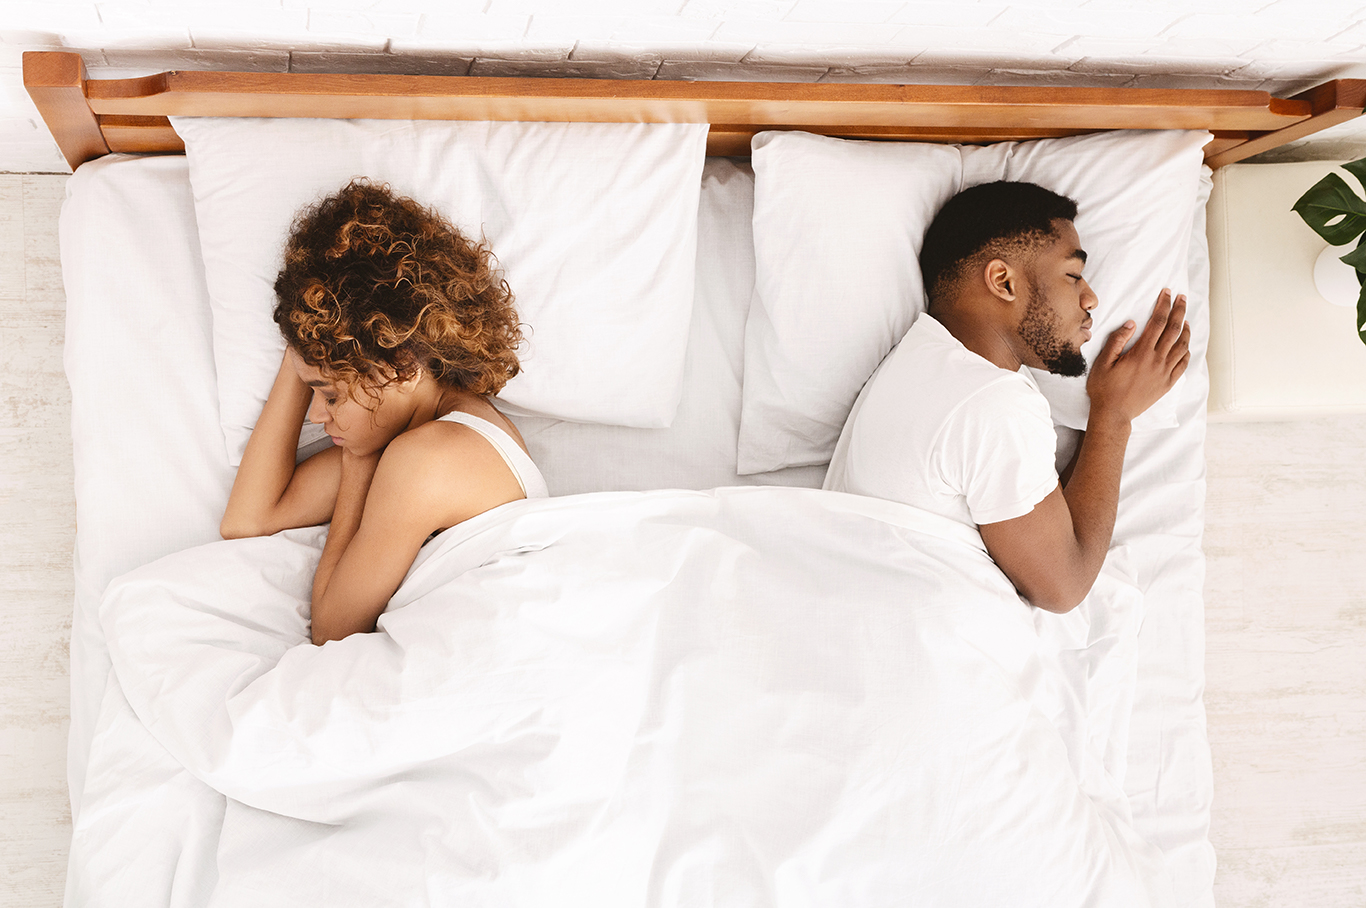 An image of a black man and a white woman sleeping on a bed, facing away from each other, symbolizing emotional distance and relationship challenges.